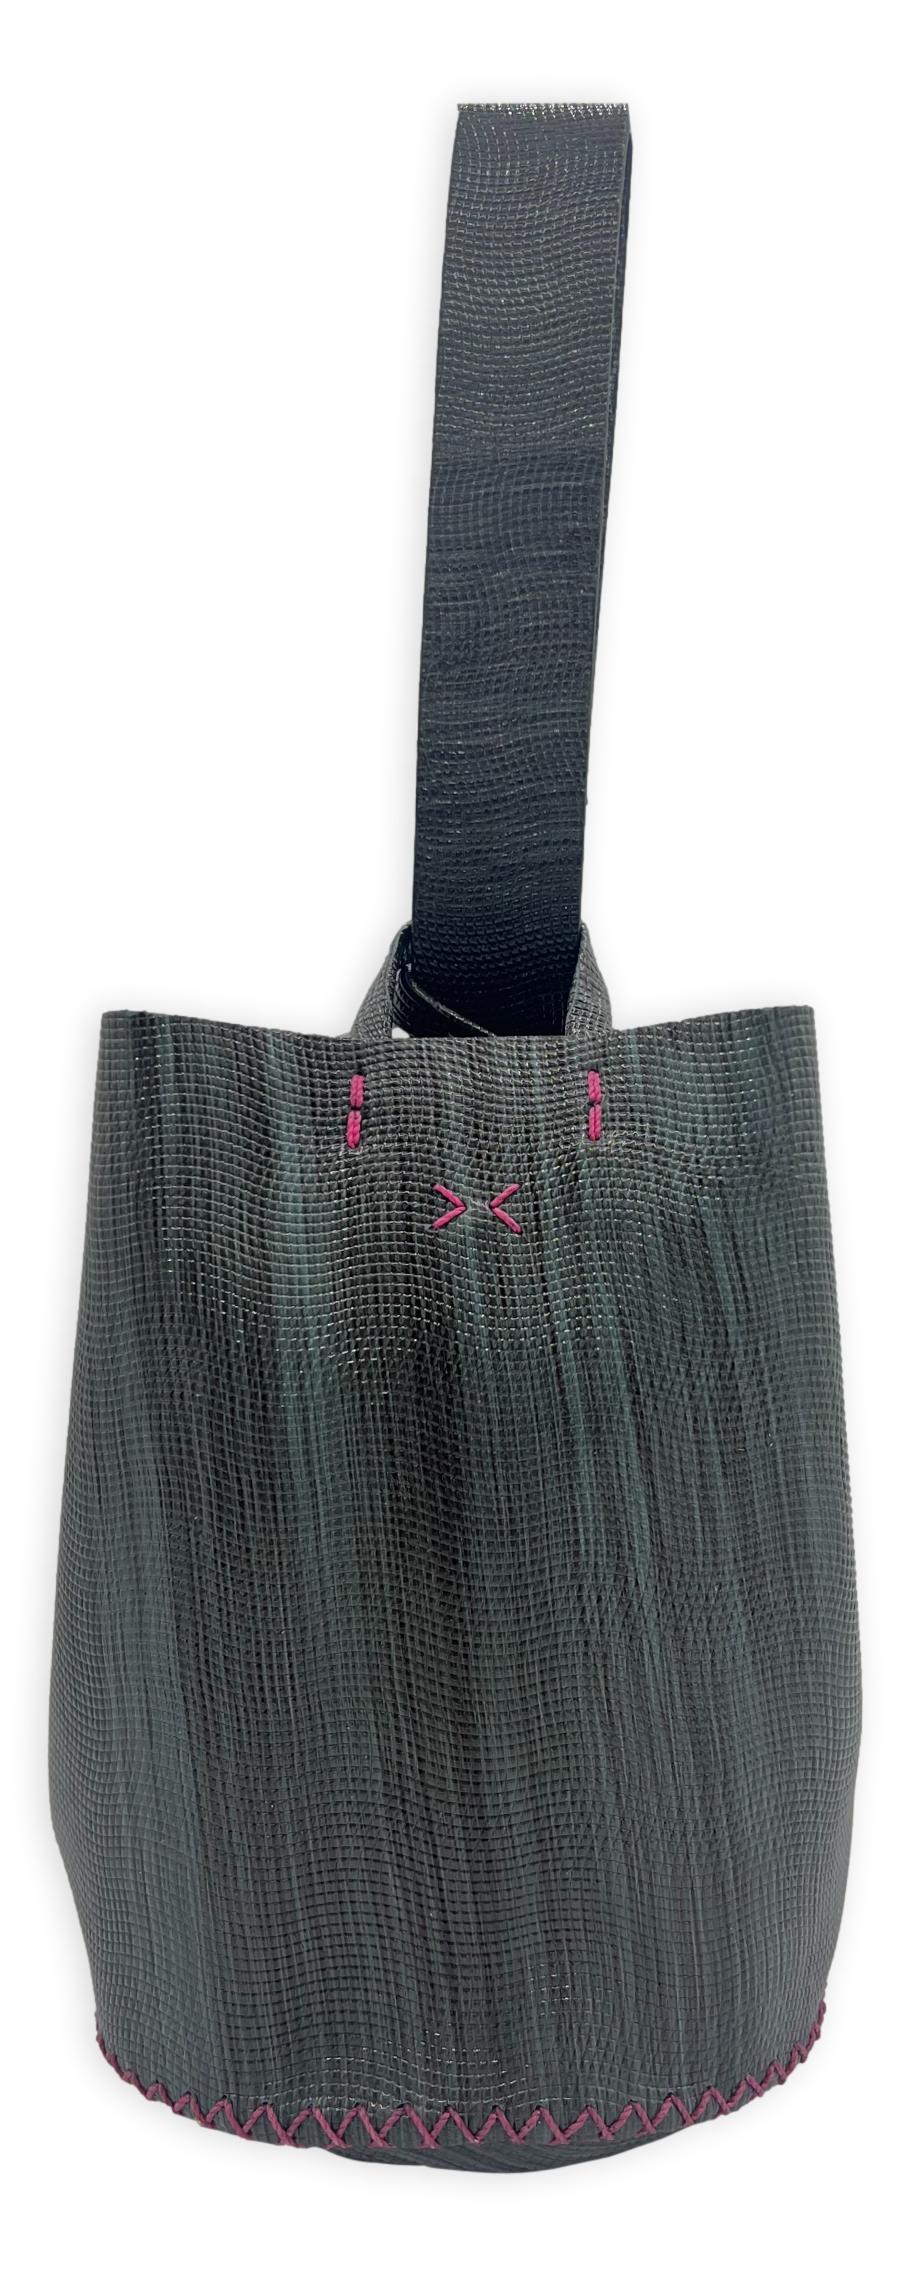 navigli bag | stingray-embossed upcycled leather with pink stitches